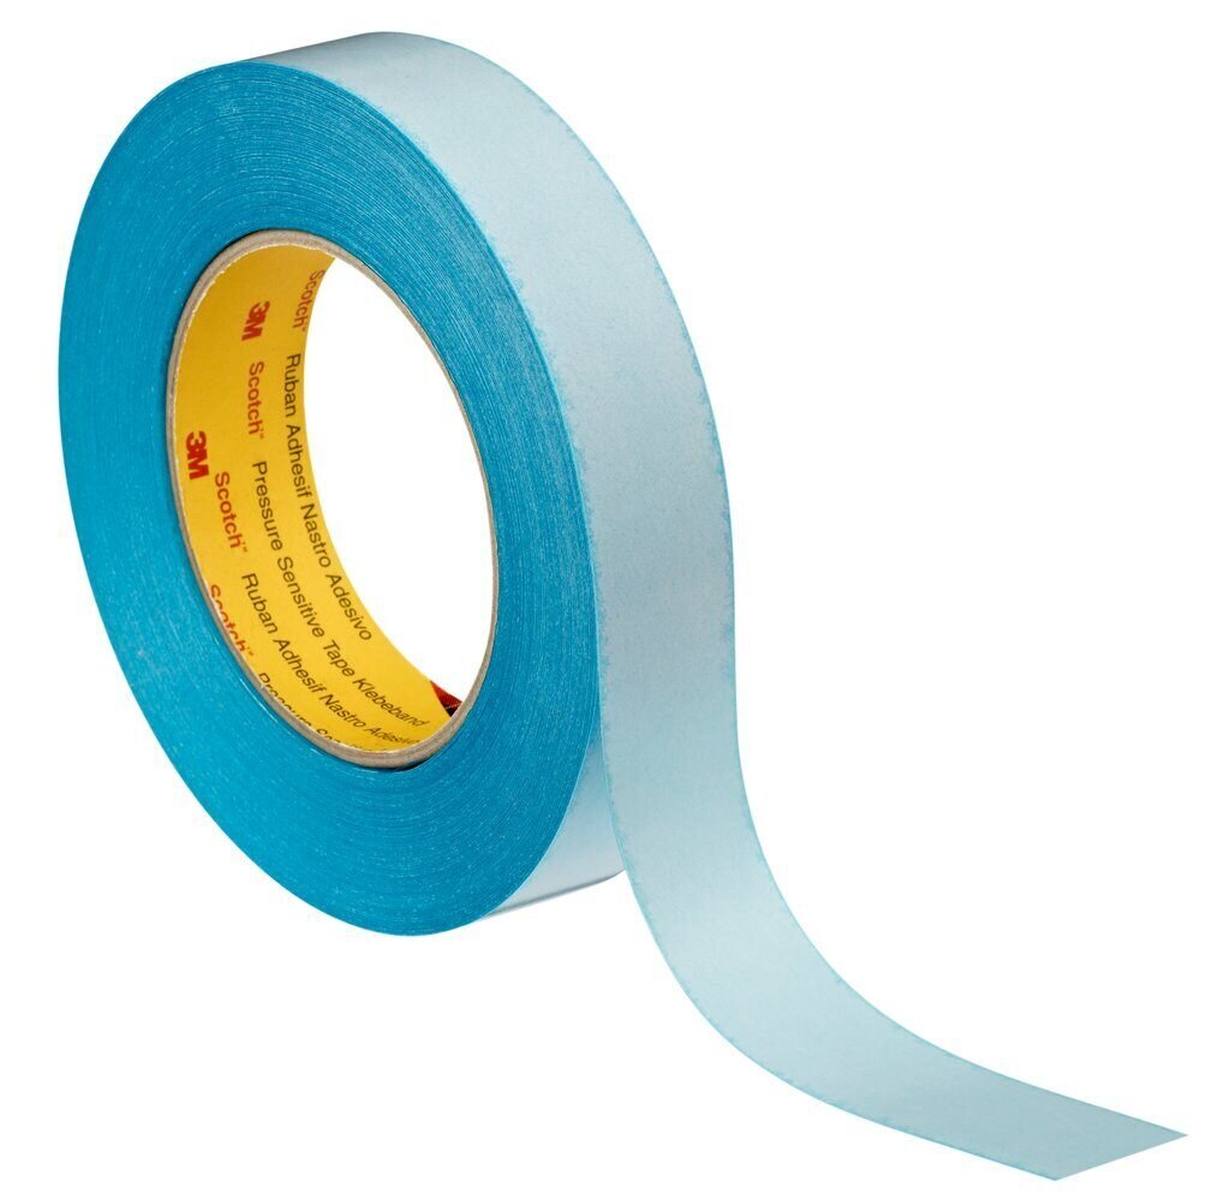 3M Double-sided adhesive tape 913E, blue, 25 mm x 50 m, 0.08 mm